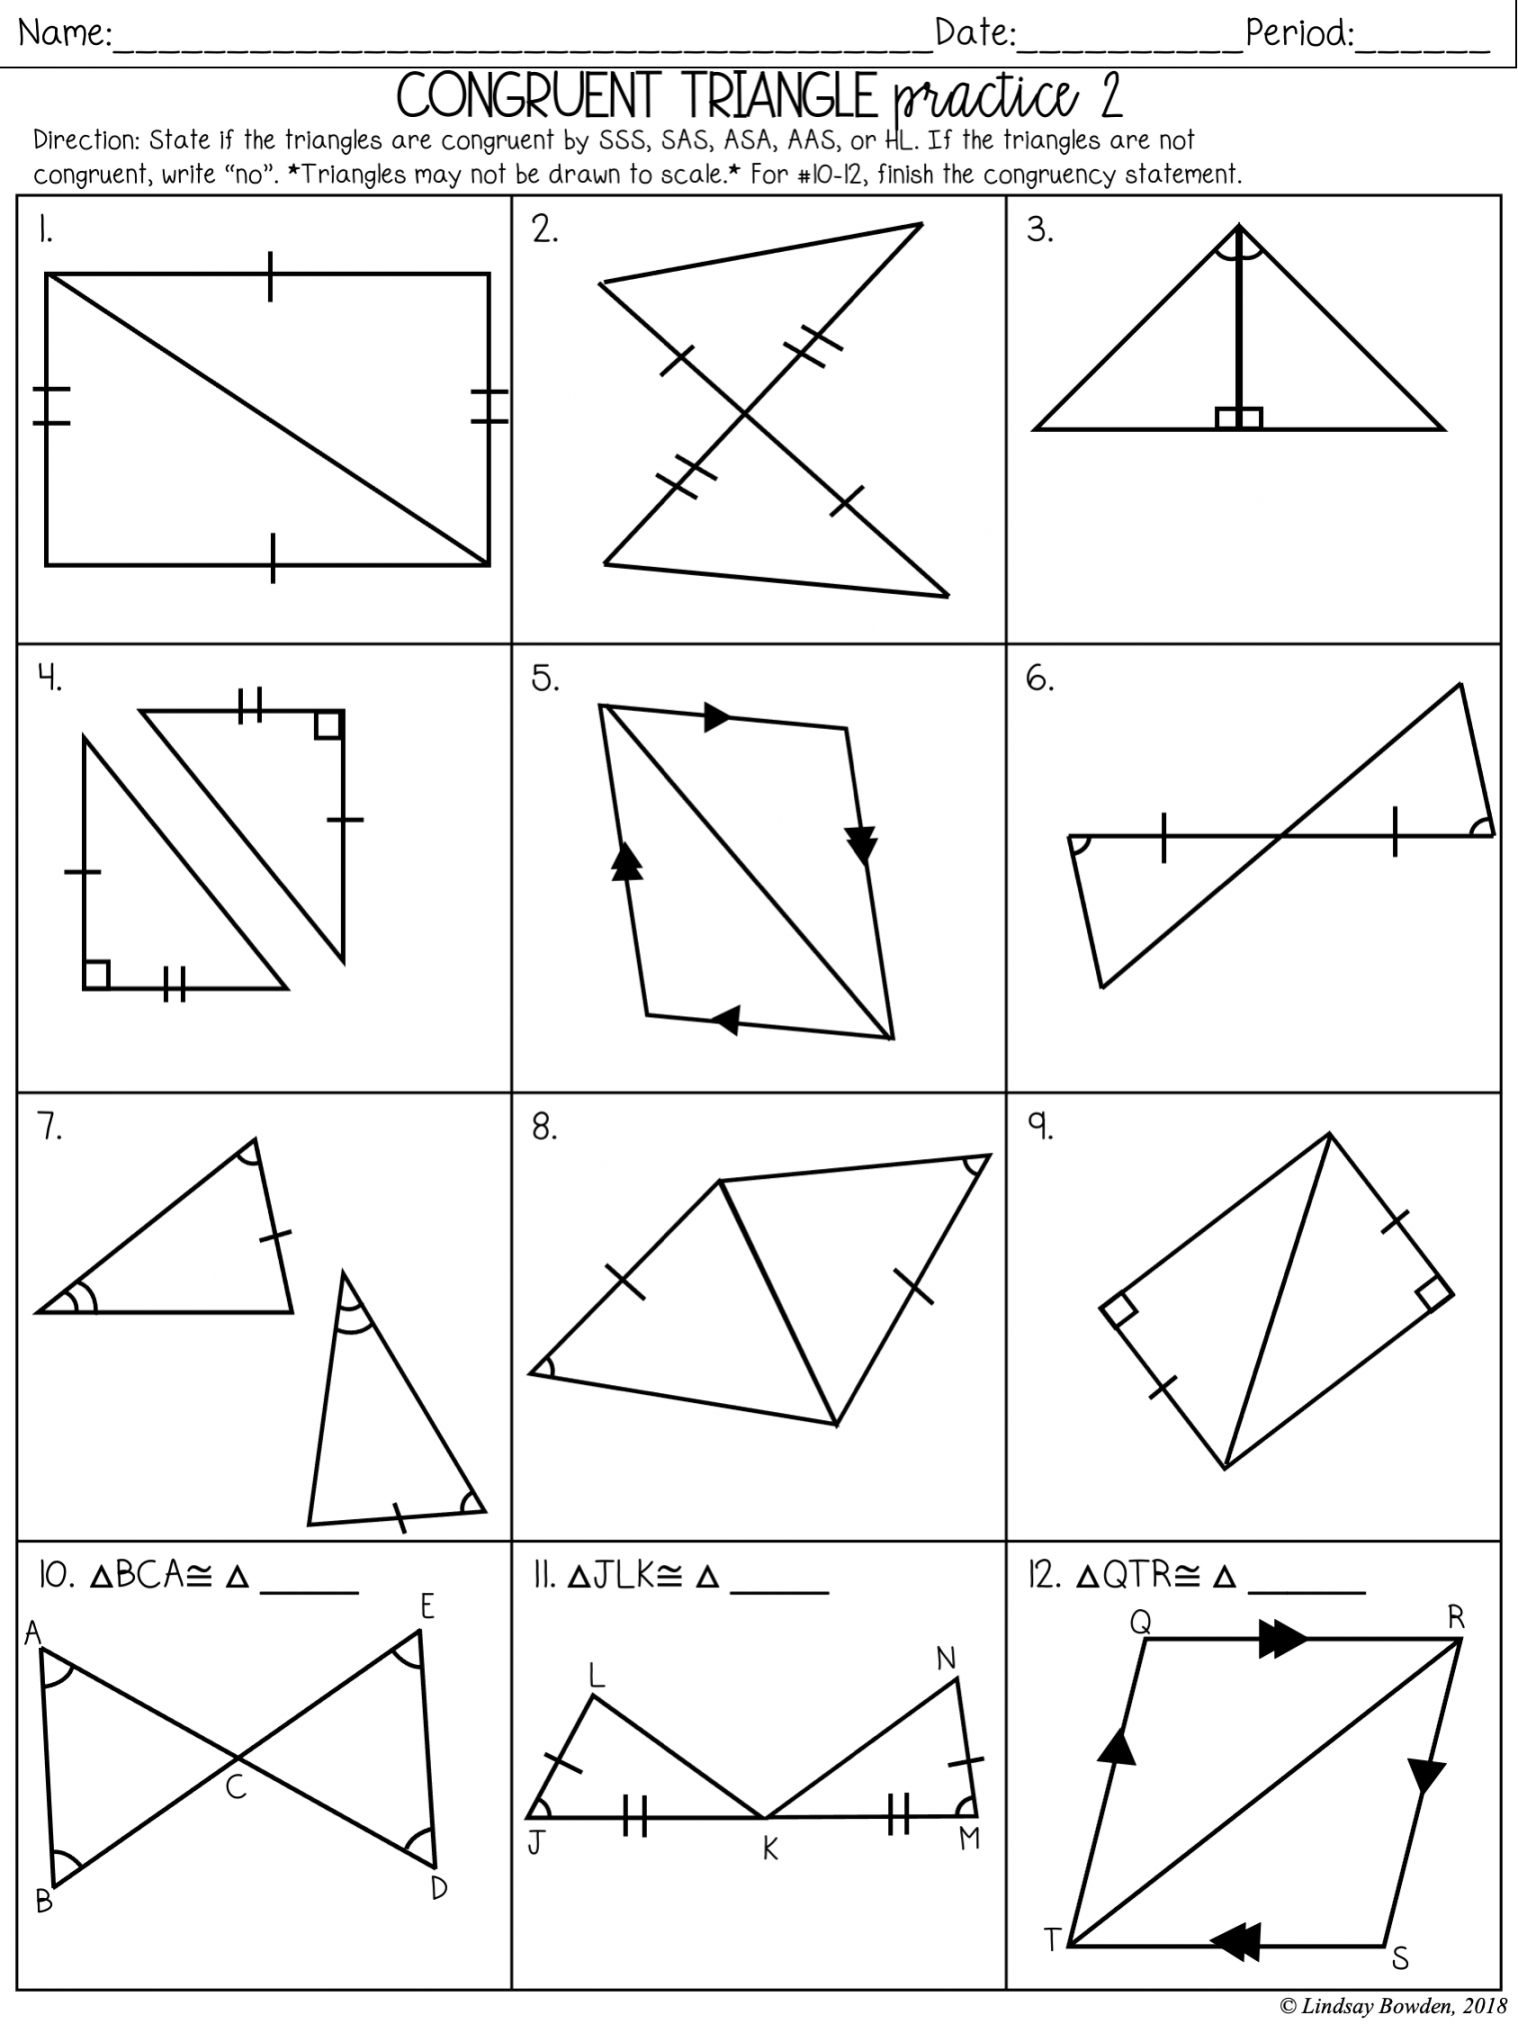 Congruent Triangles Notes and Worksheets - Lindsay Bowden